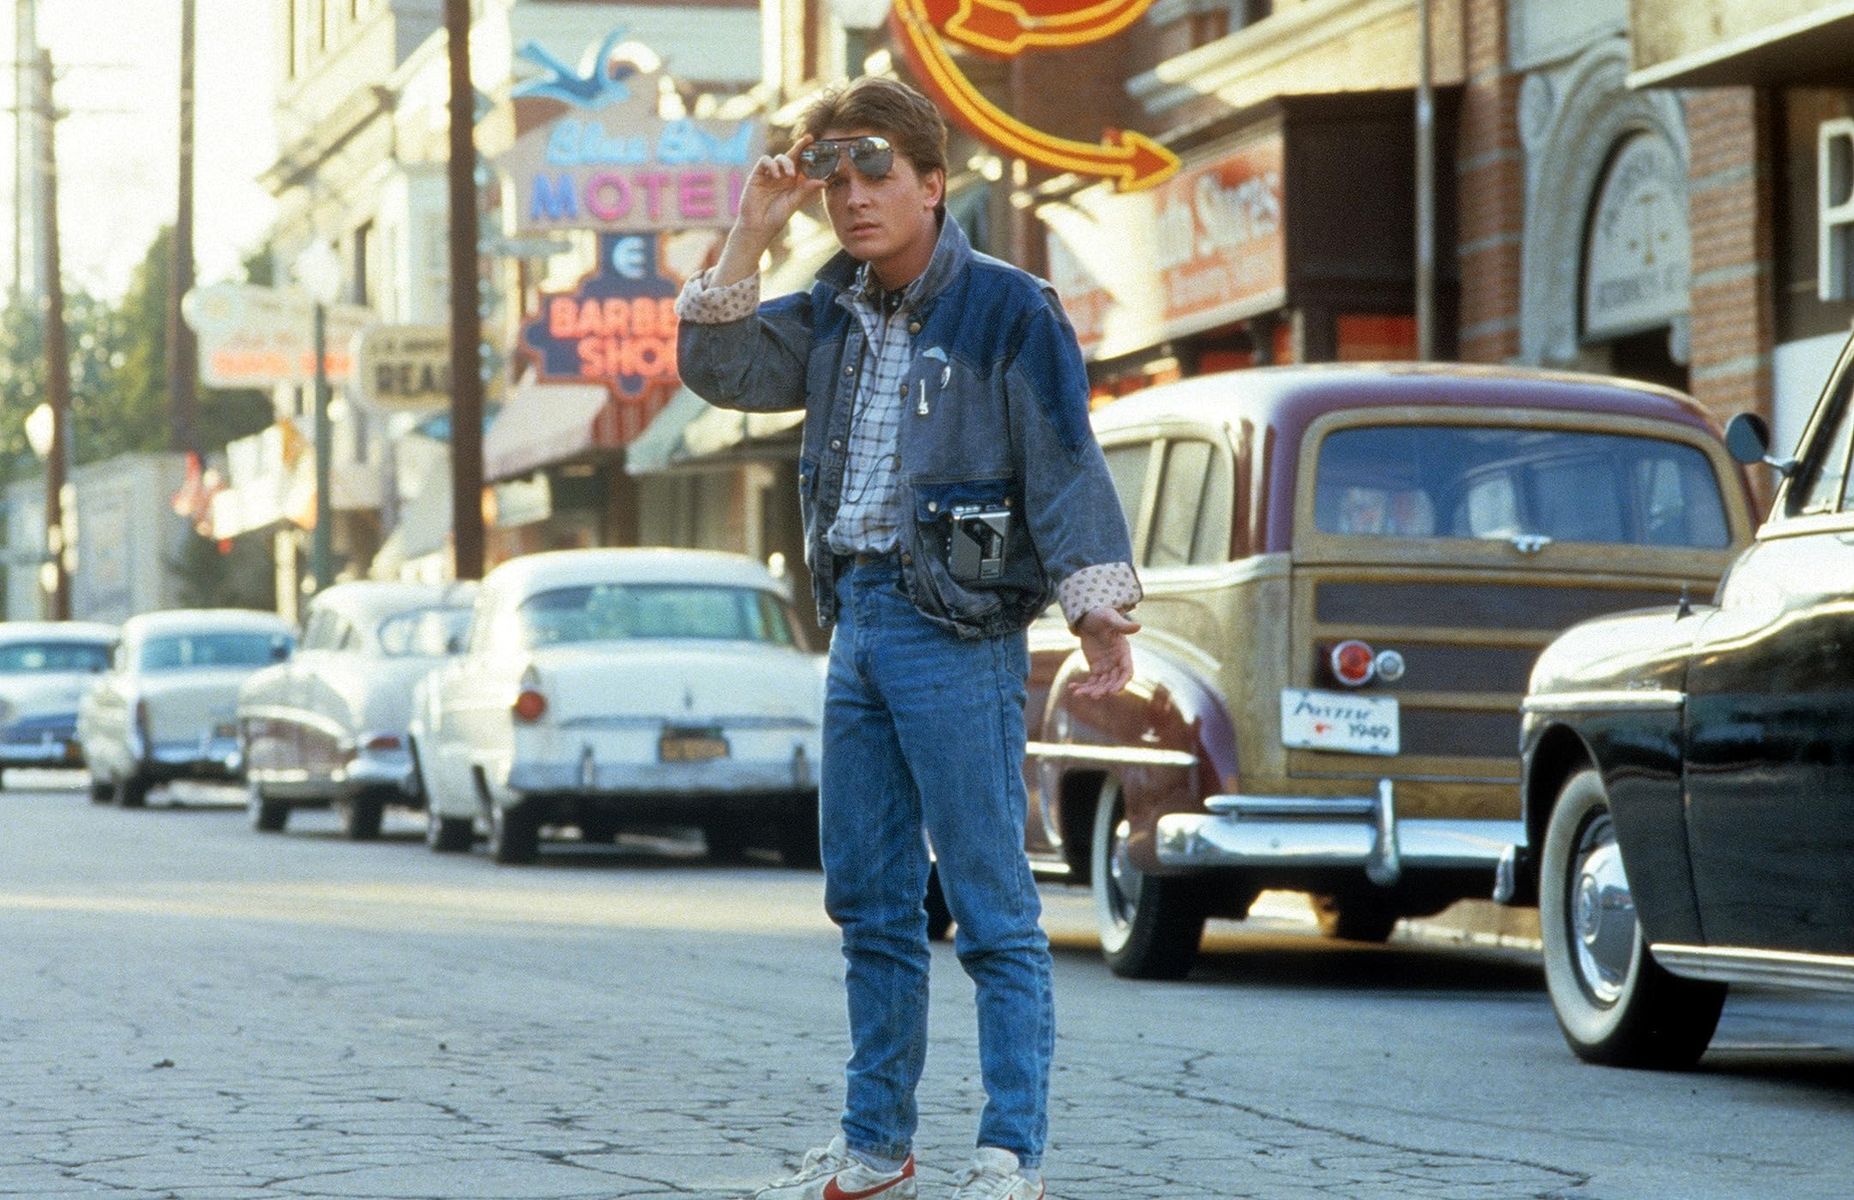 <p>For those who were kids in the ‘80s, Robert Zemeckis’s <em>Back to the Future</em> is the quintessential time-travel adventure movie! When teen Marty McFly is accidentally sent back to 1955 in a time-travelling DeLorean, built by eccentric scientist Doc Brown, he inadvertently prevents his future parents from falling in love. Starring Michael J. Fox and Christopher Lloyd, <em>Back to the Future</em> was an international success, with critics calling it a movie of <a href="https://www.newspapers.com/article/austin-american-statesman-back-to-the-fu/127257637/">“abundant humour, boundless energy, and [with] a relentlessly good heart.”</a></p>